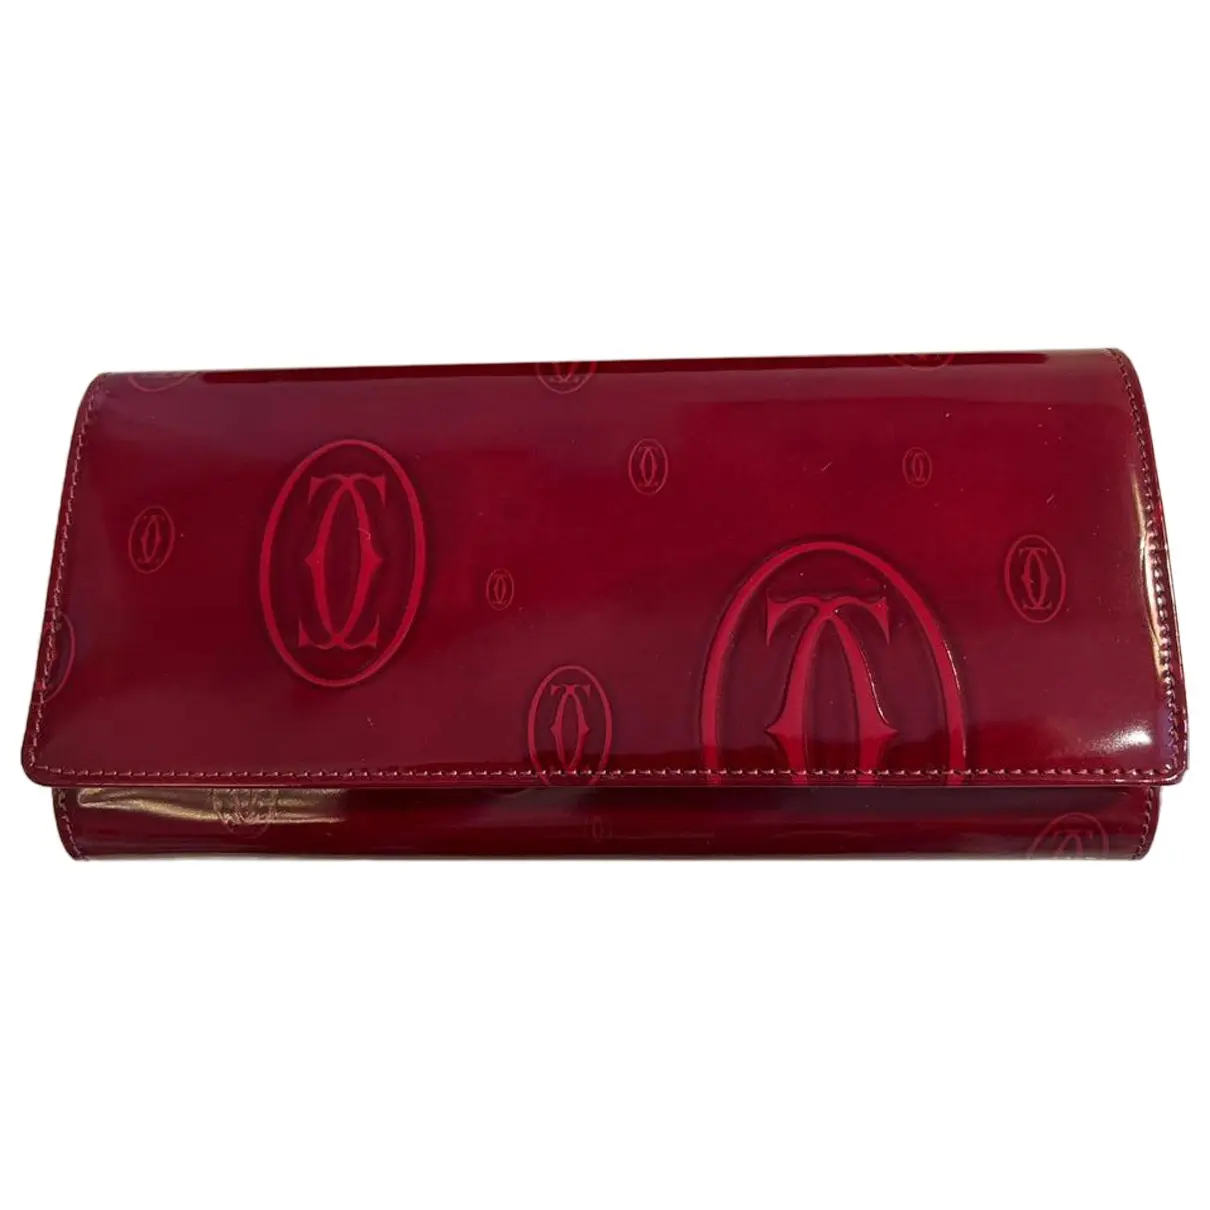 Patent leather clutch bag Cartier